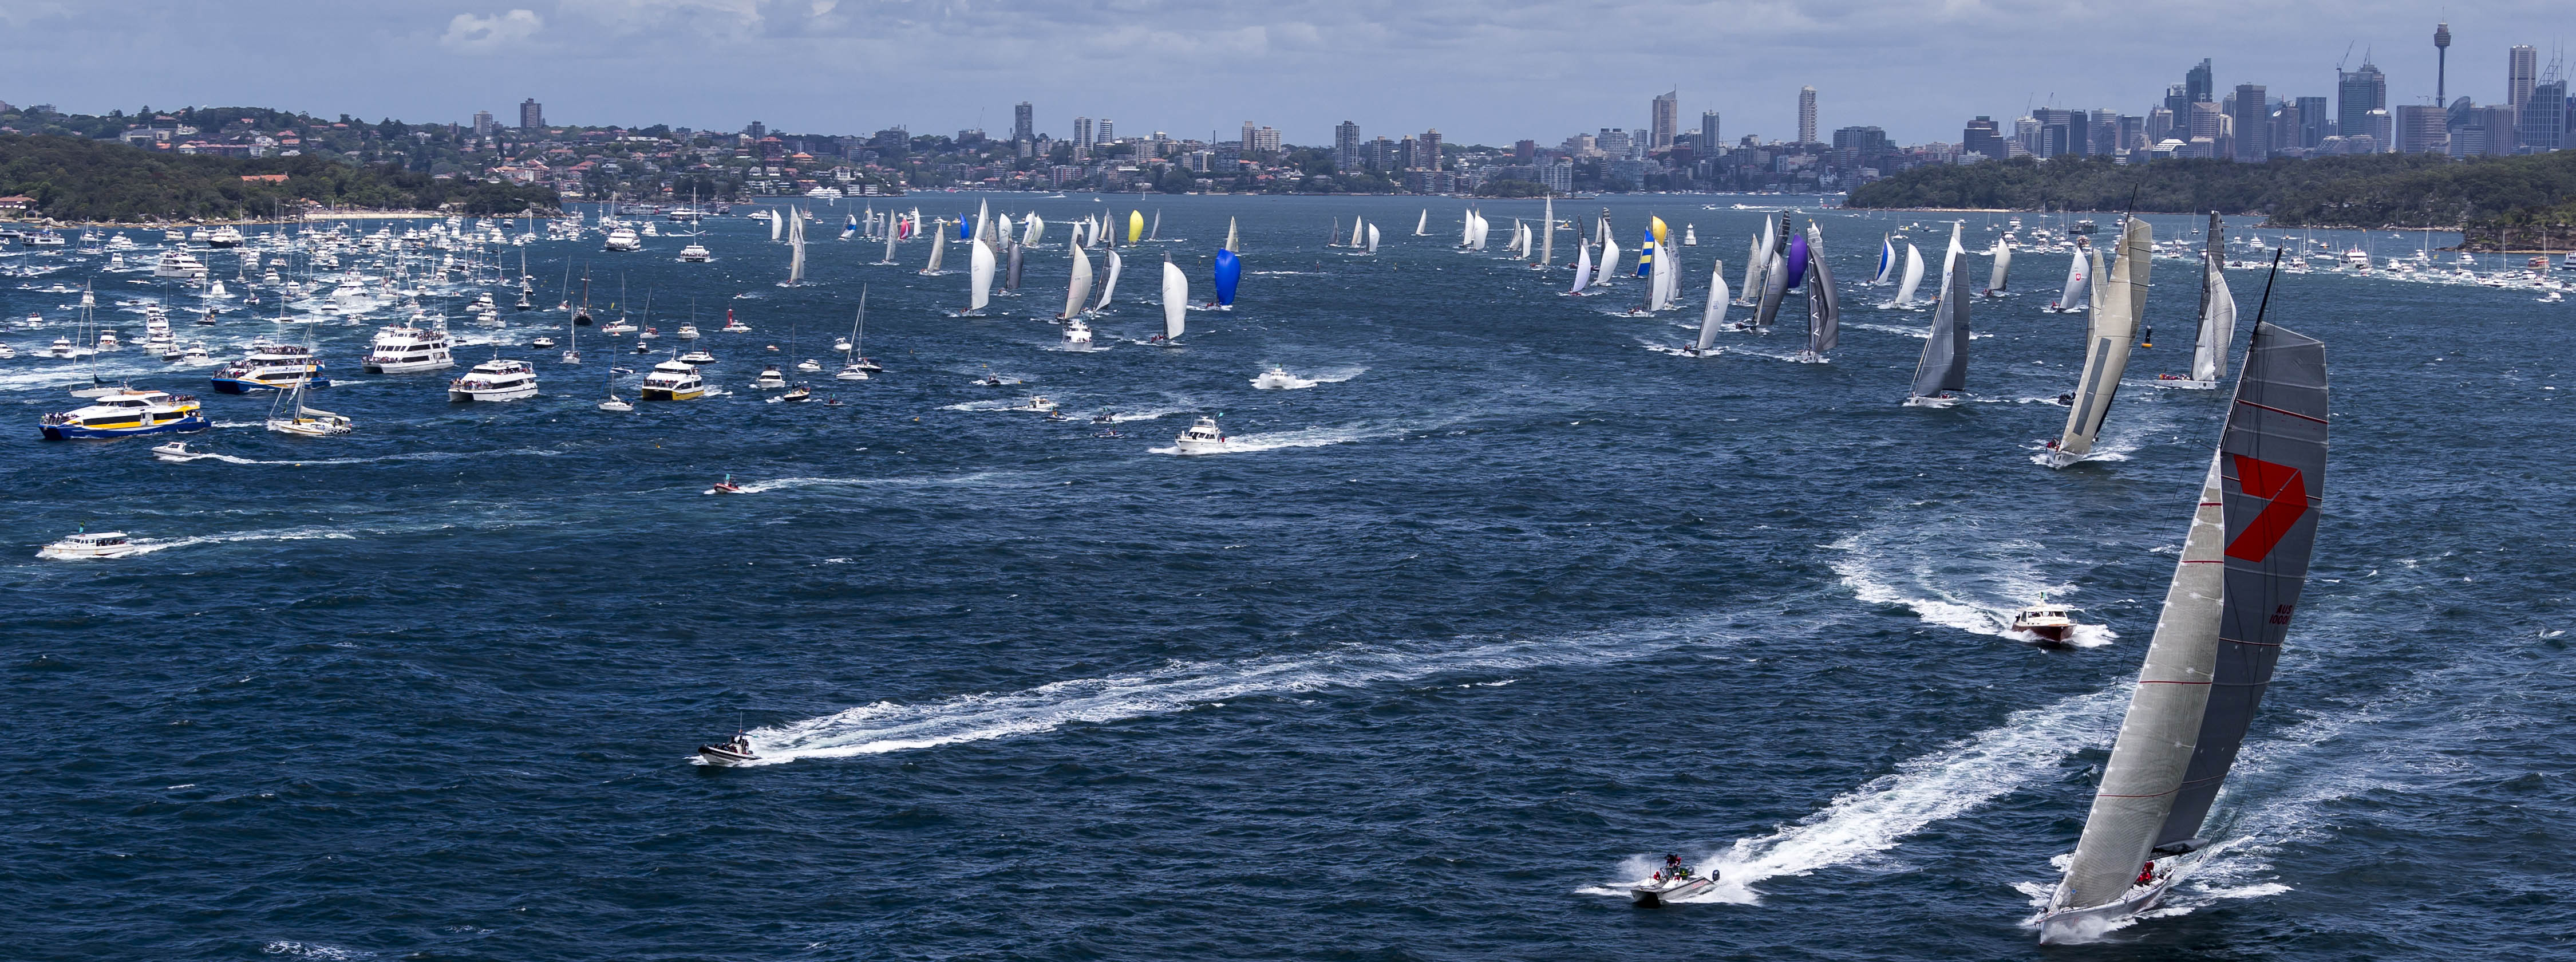 Clipper Race fleet and Sir Robin Knox-Johnston officially entered in Rolex Sydney Hobart Race 2015